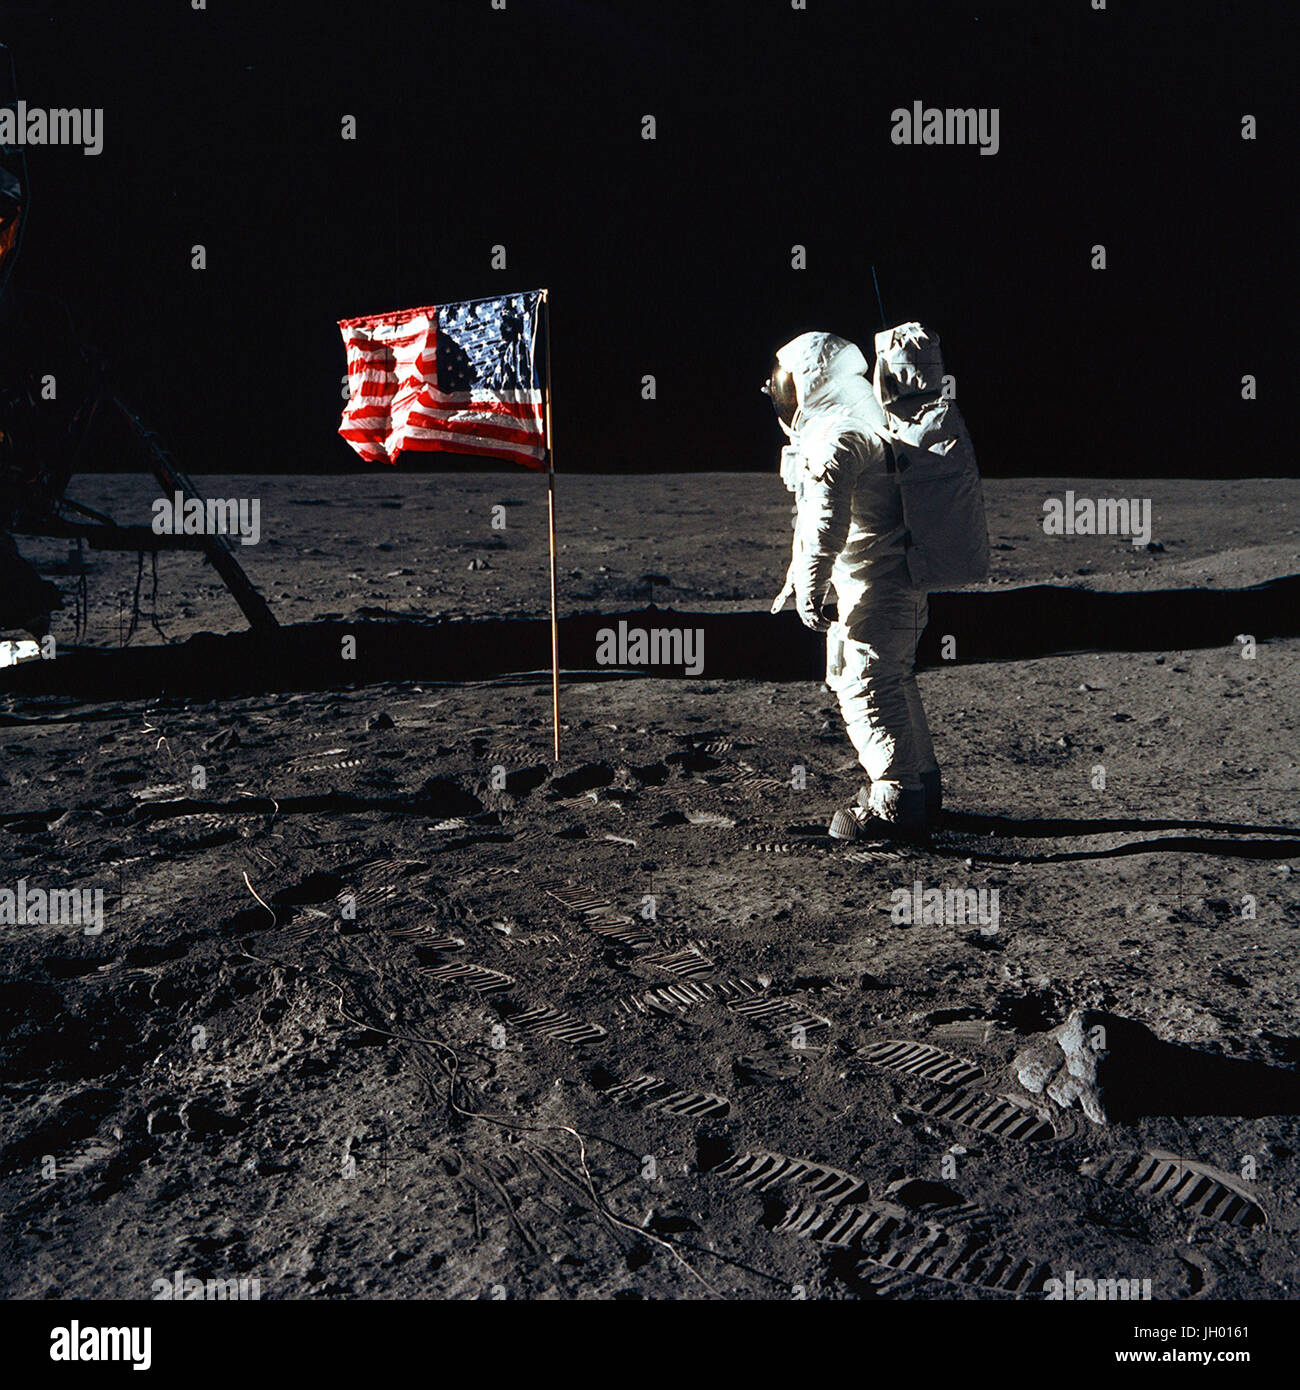 Astronaut Buzz Aldrin, lunar module pilot of the first lunar landing mission, poses for a photograph beside the deployed United States flag during an Apollo 11 Extravehicular Activity (EVA) on the lunar surface. The Lunar Module (LM) is on the left, and the footprints of the astronauts are clearly visible in the soil of the Moon. Astronaut Neil A. Armstrong, commander, took this picture with a 70mm Hasselblad lunar surface camera. While astronauts Armstrong and Aldrin descended in the LM, the 'Eagle', to explore the Sea of Tranquility region of the Moon, astronaut Michael Collins, command modu Stock Photo